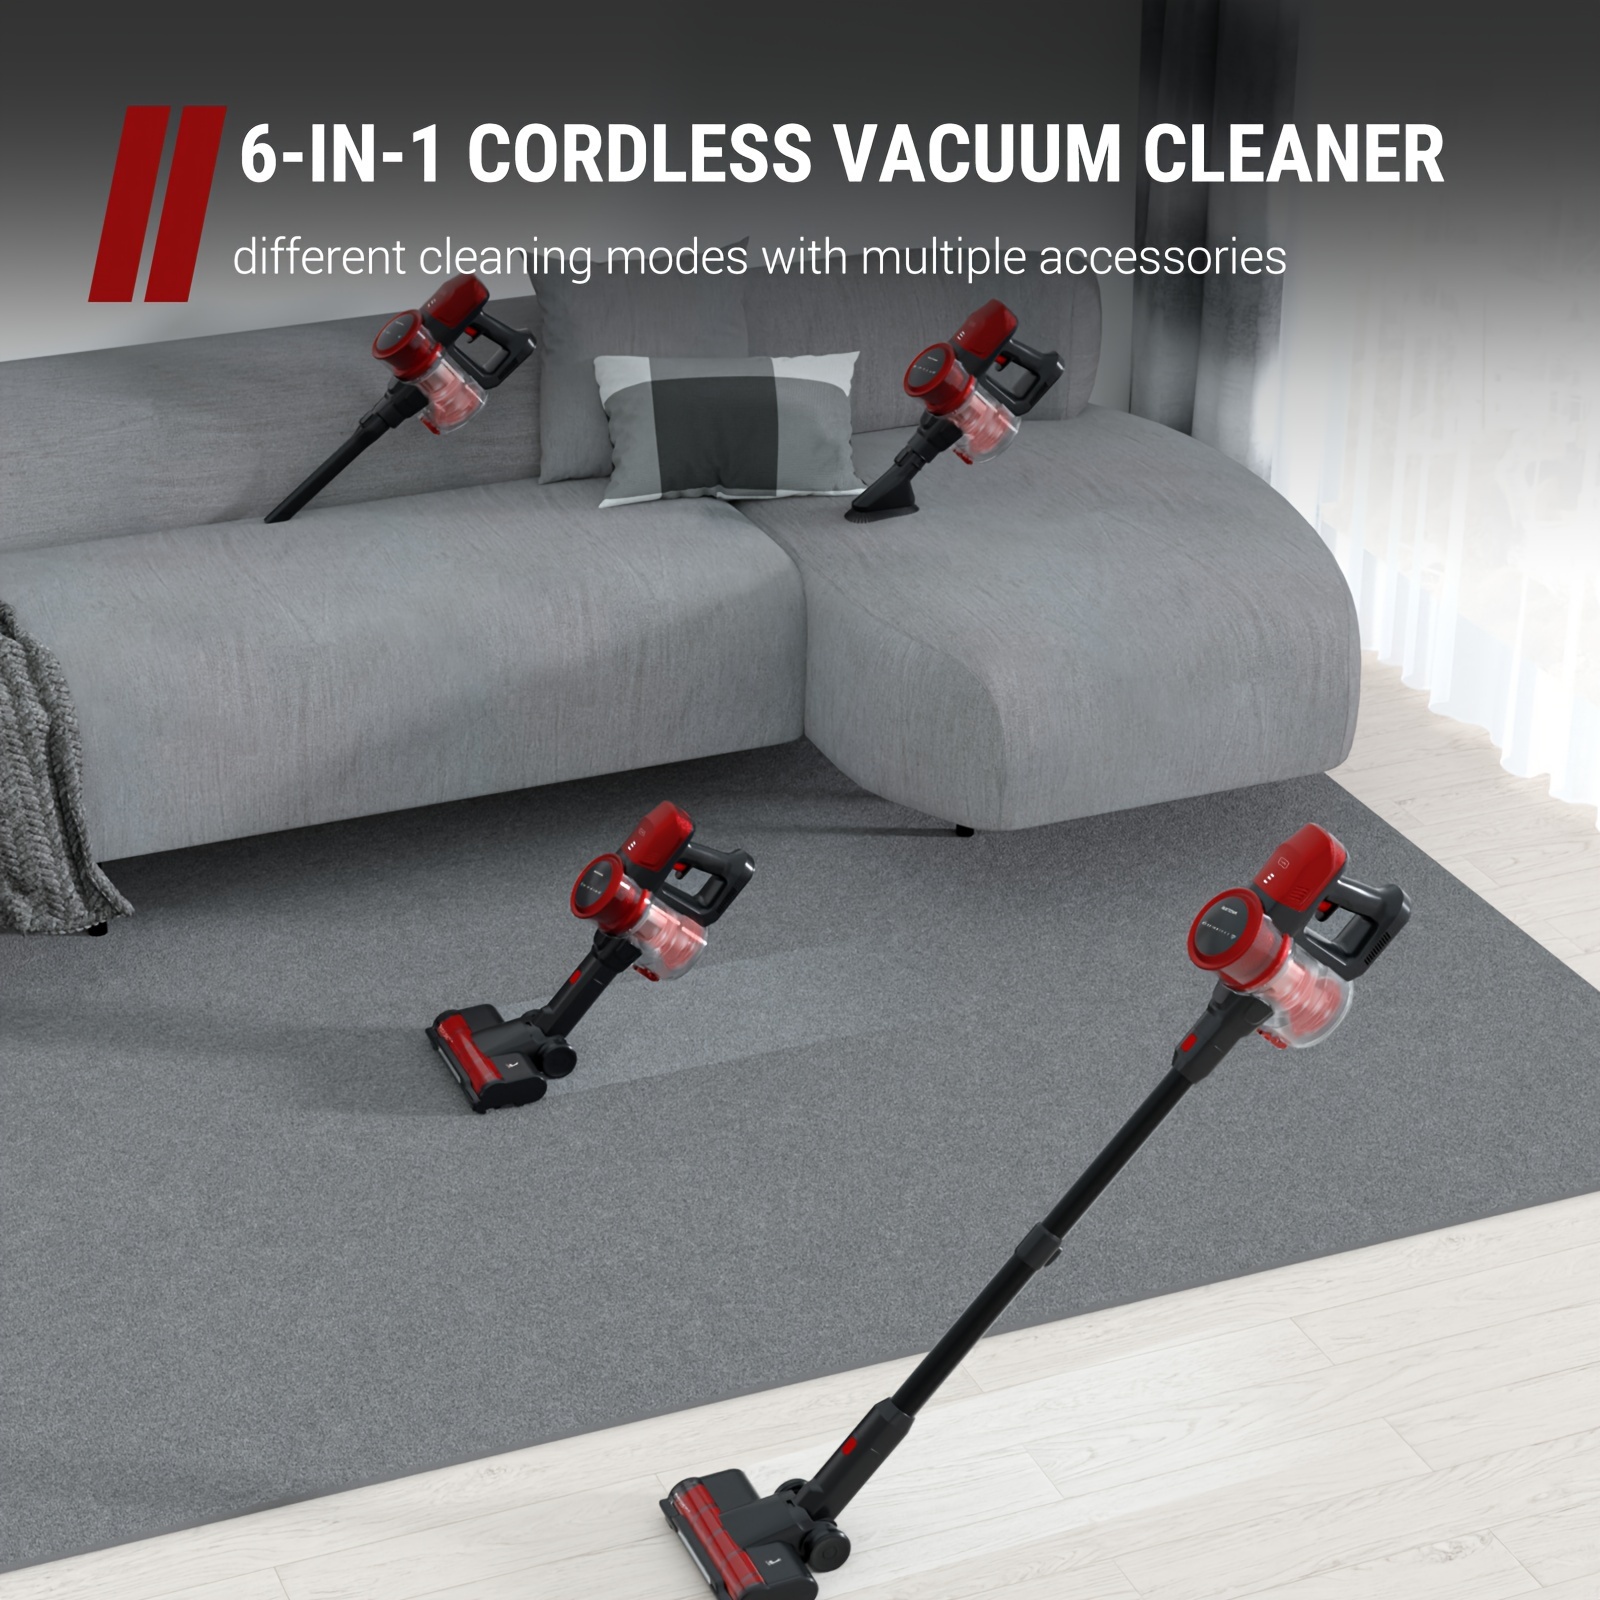 

Cleaner - Cordless Vacuum Cleaner W/ Strong Suction, Self-standing Household Vacuum Cleaner For Carpet And Floor, 6-in-1 Wireless Vacuum W/ Led Headlights